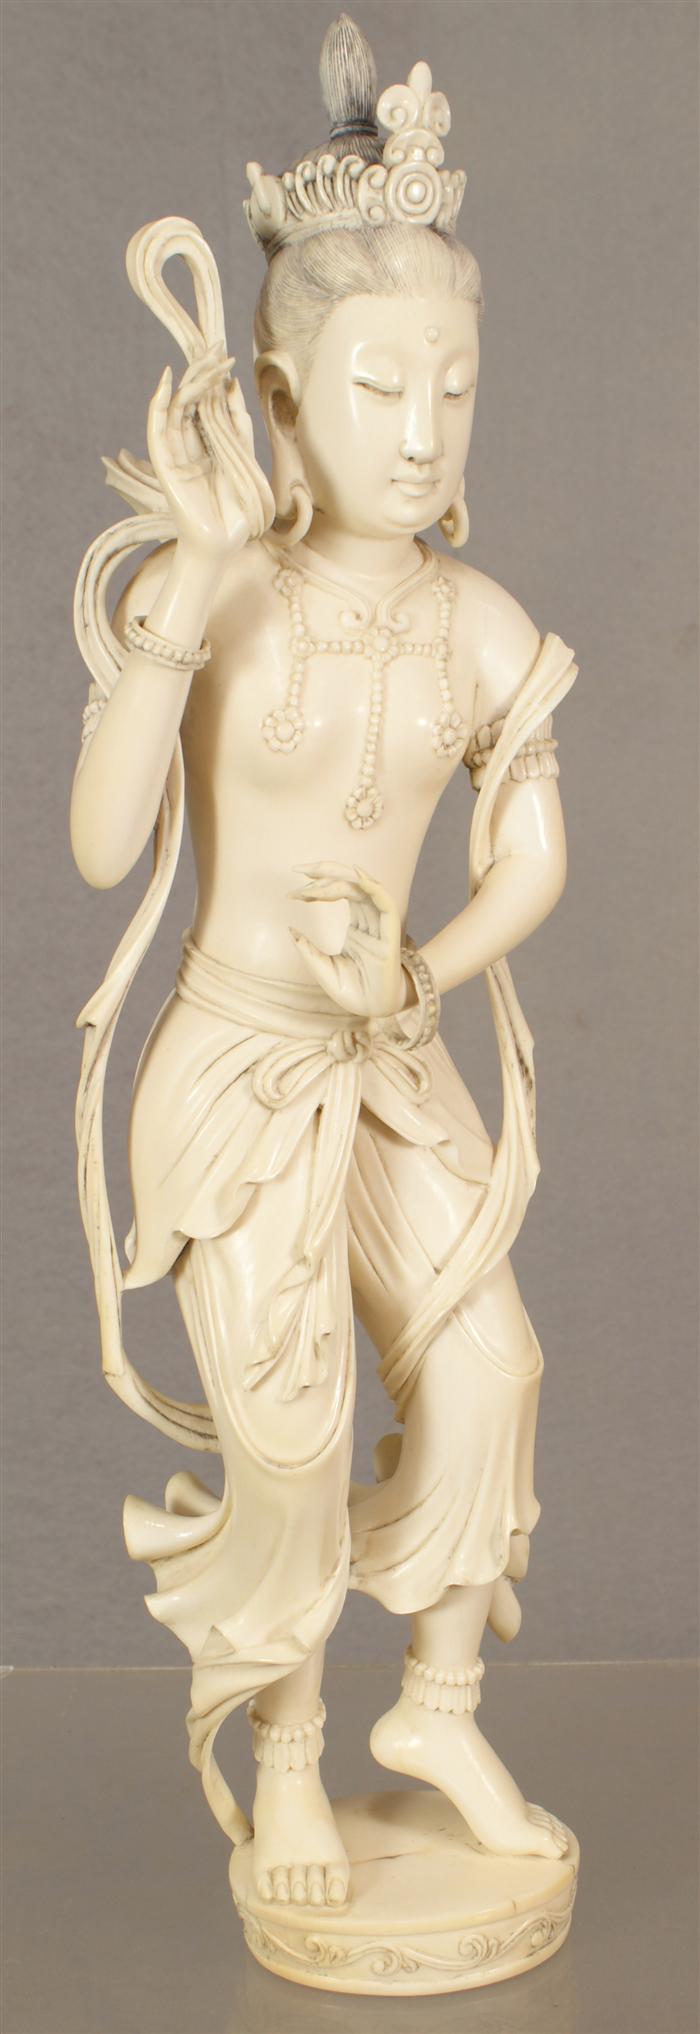 Carved ivory maiden 20th c approximately 3dd59